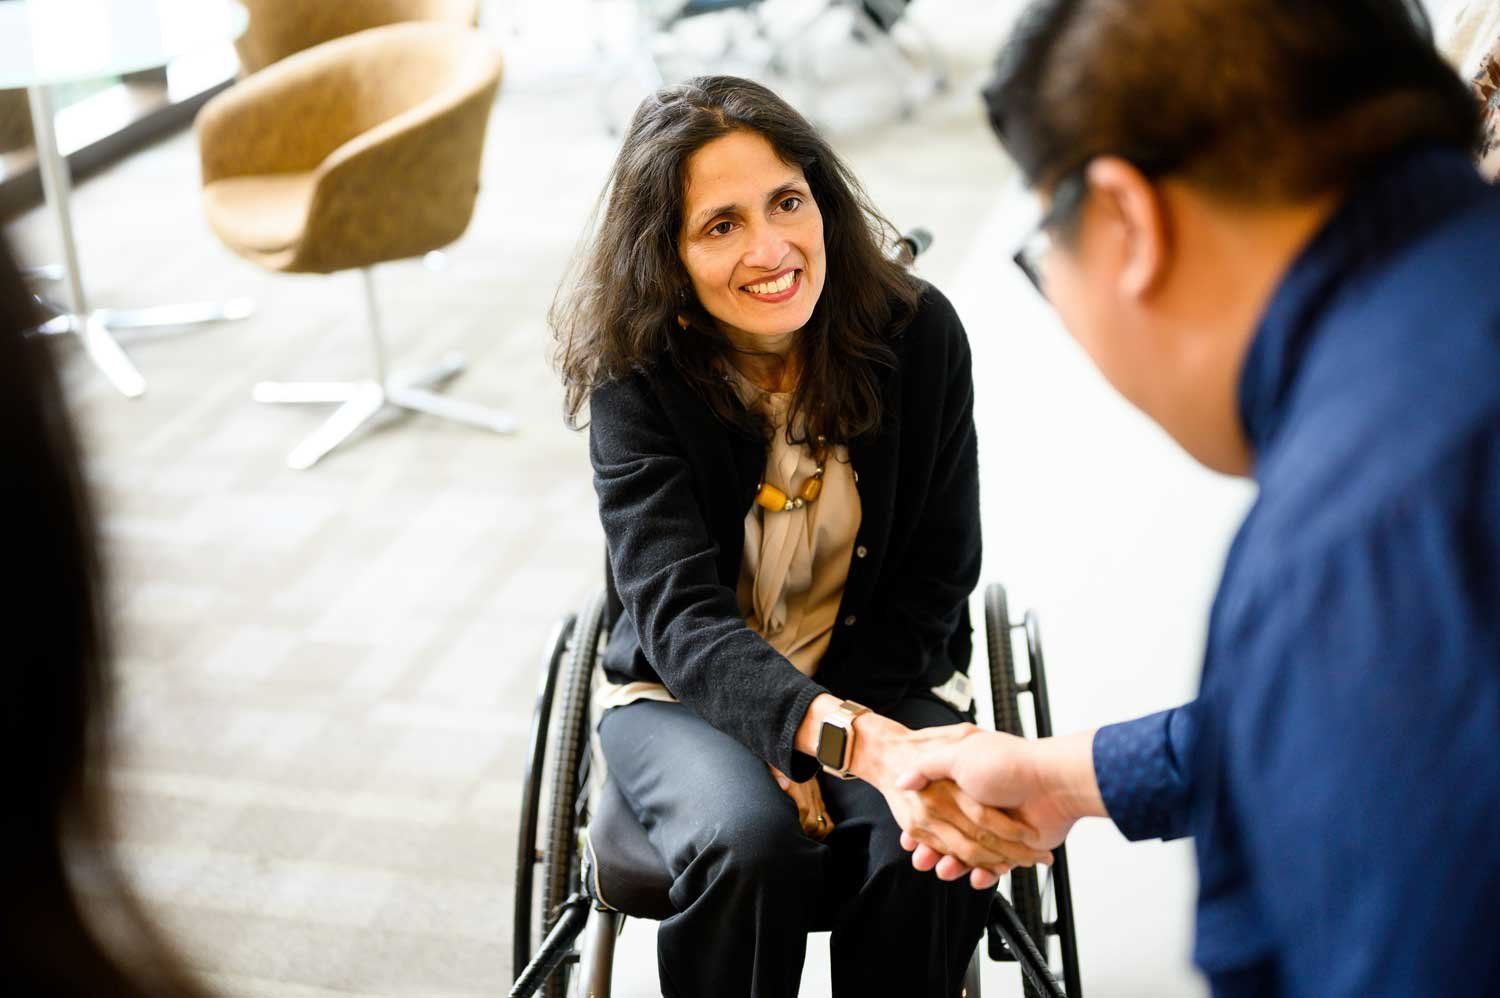 Janhavi Bonville sits in her wheelchair and smiles as she shakes hands with a colleague.